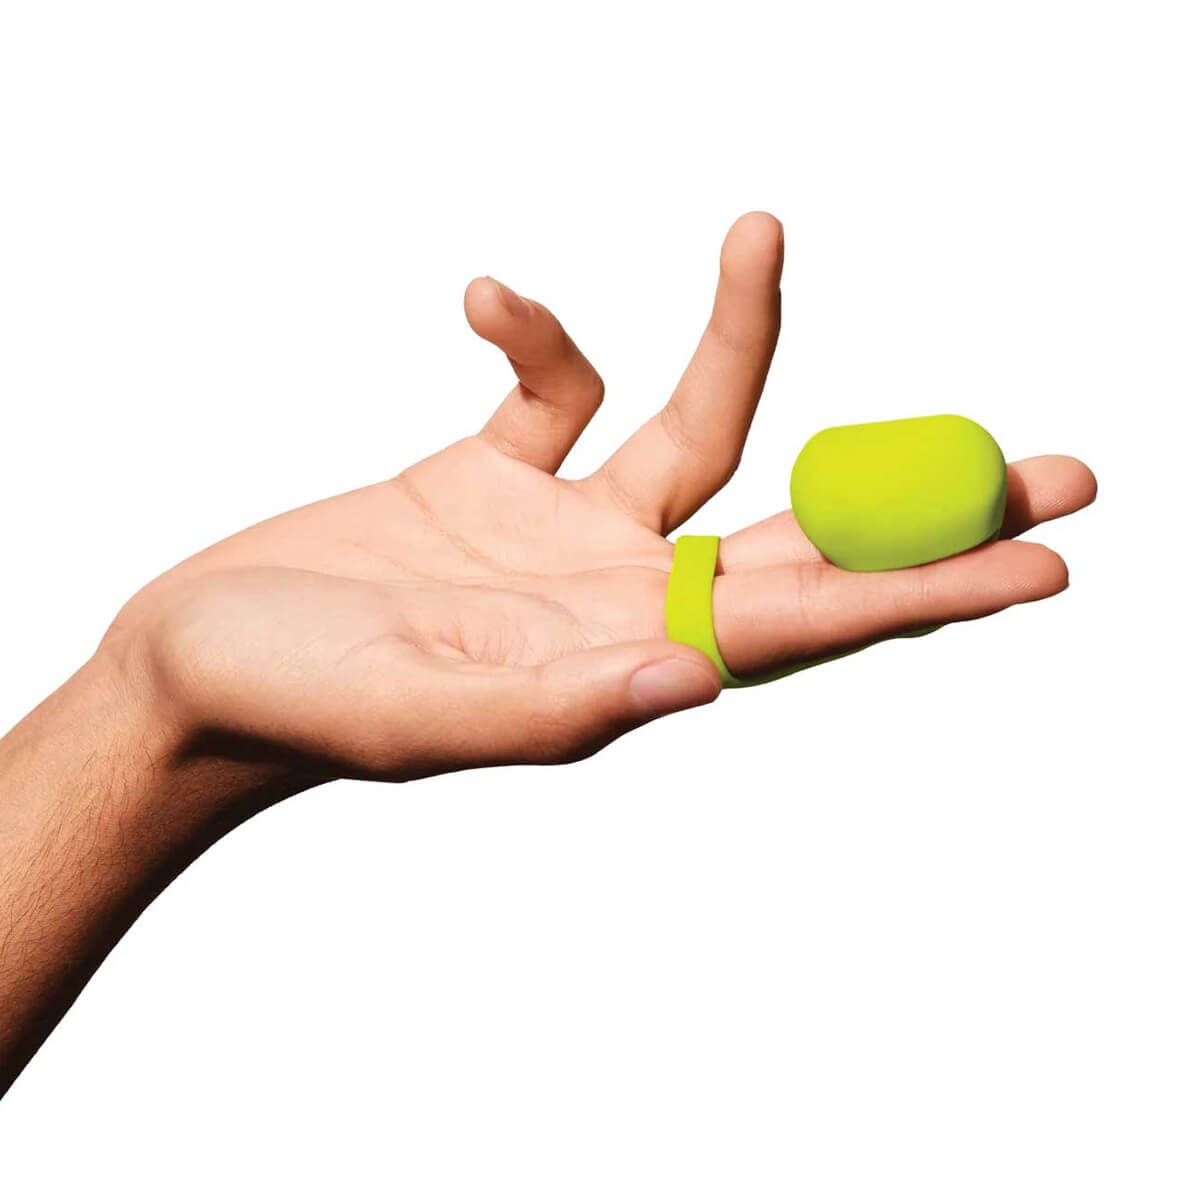 Someone's hand holding a bright green finger vibrator by Dame Products around their fingers Nudie Co